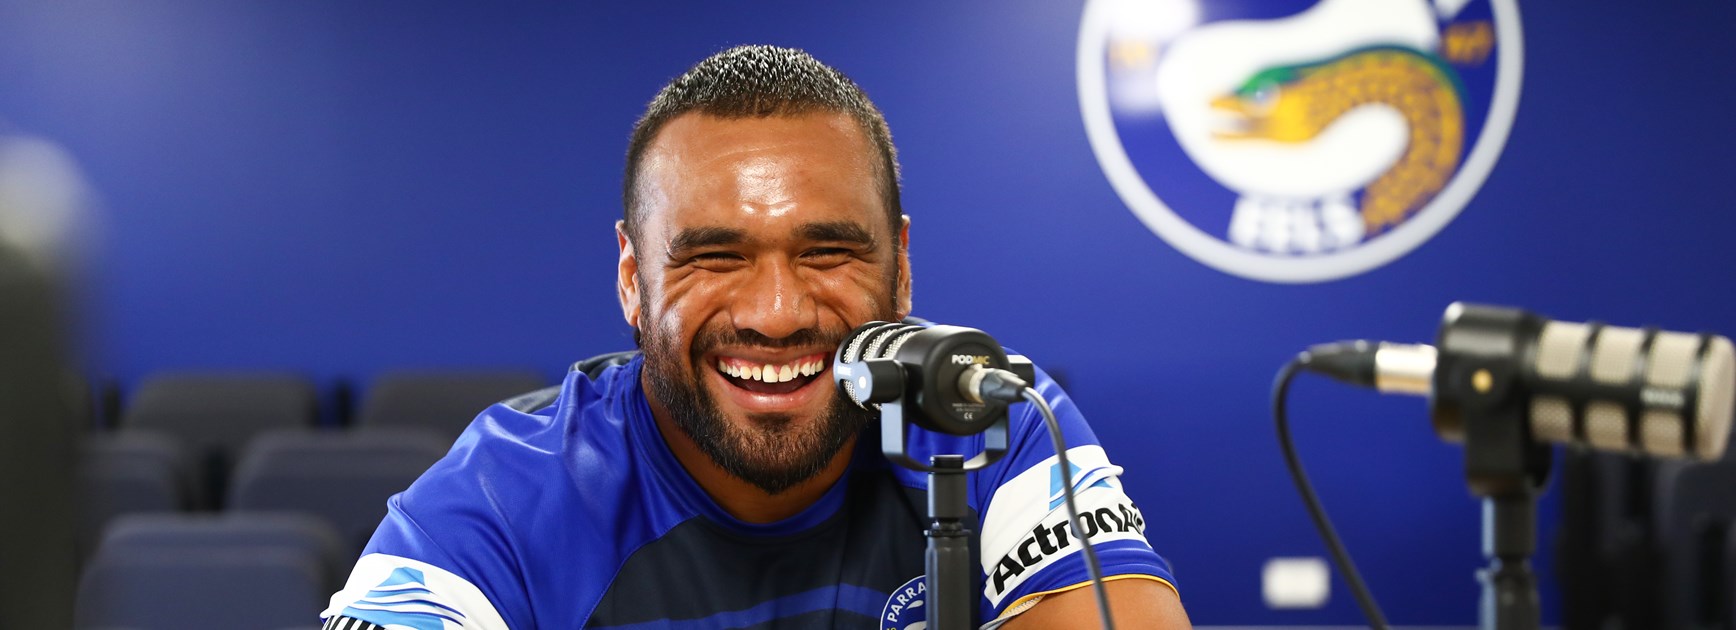 Junior Paulo joins the Talk in Parradise podcast